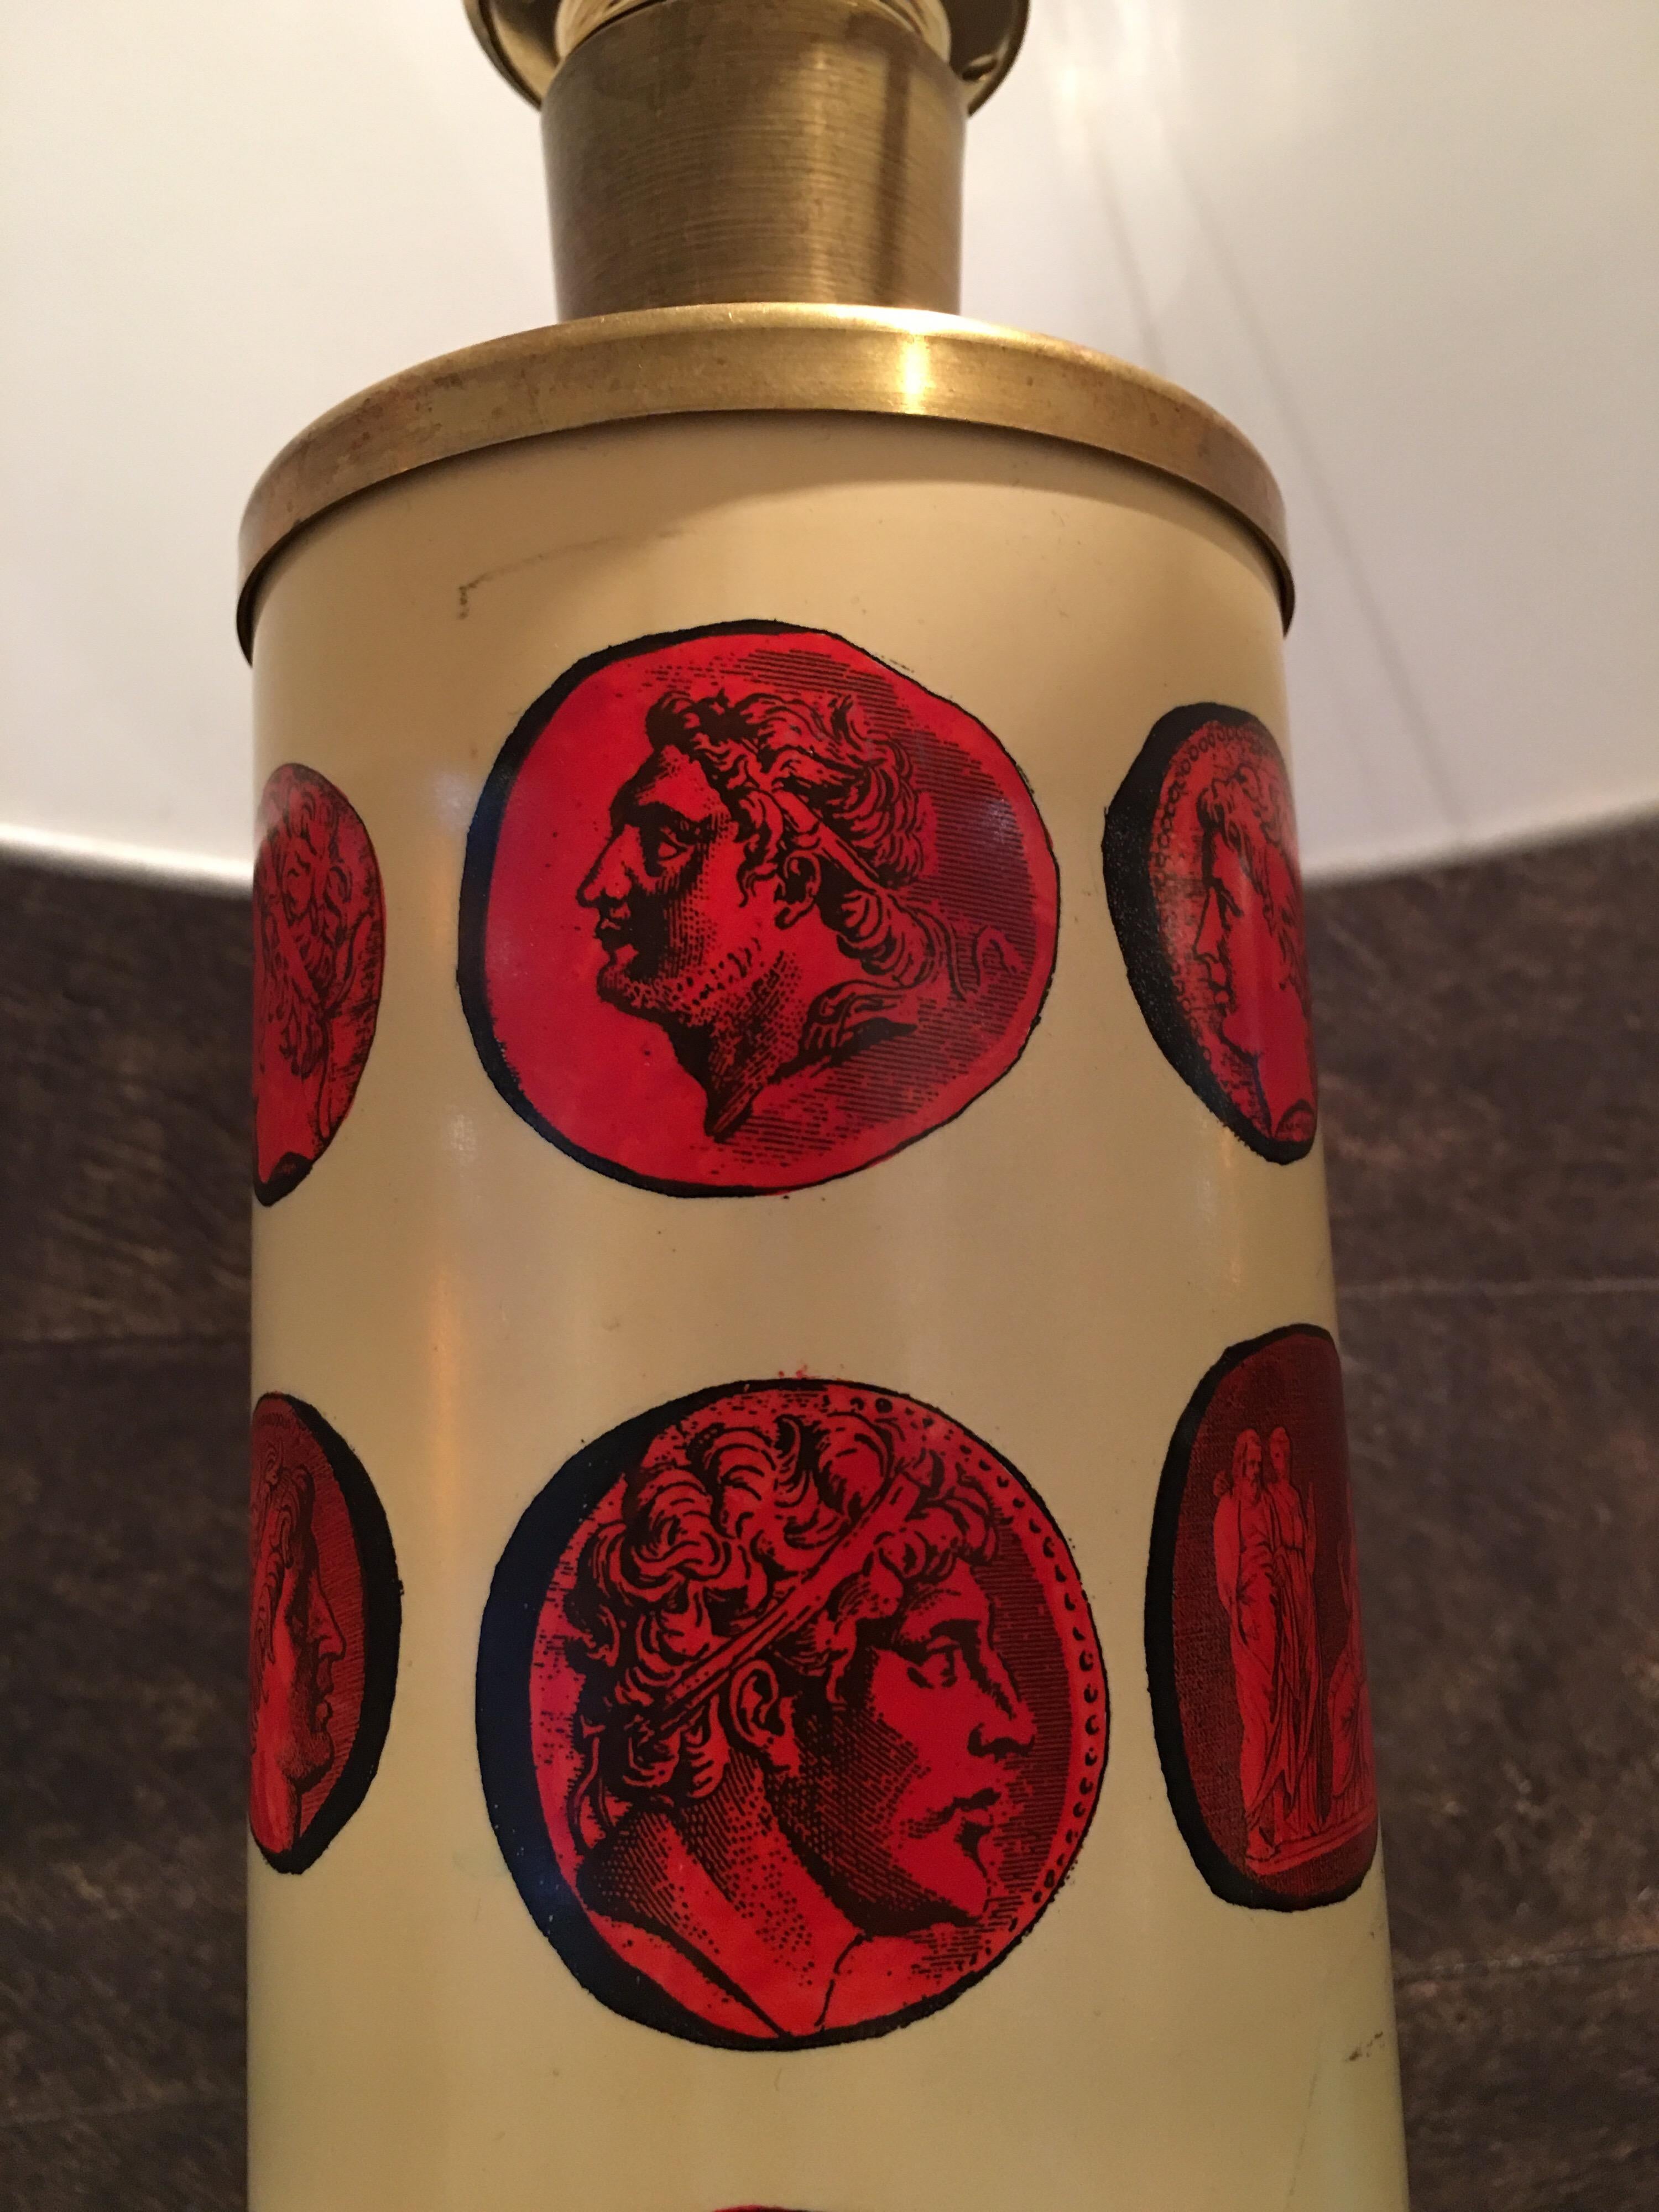 Enameled table lamp in white with red transfer printed lithographic cameos of emperors, and patinated brass.

The lacquered, cylindrical base features transfer images of Classical Roman figures on a parchment colored background from 18th century